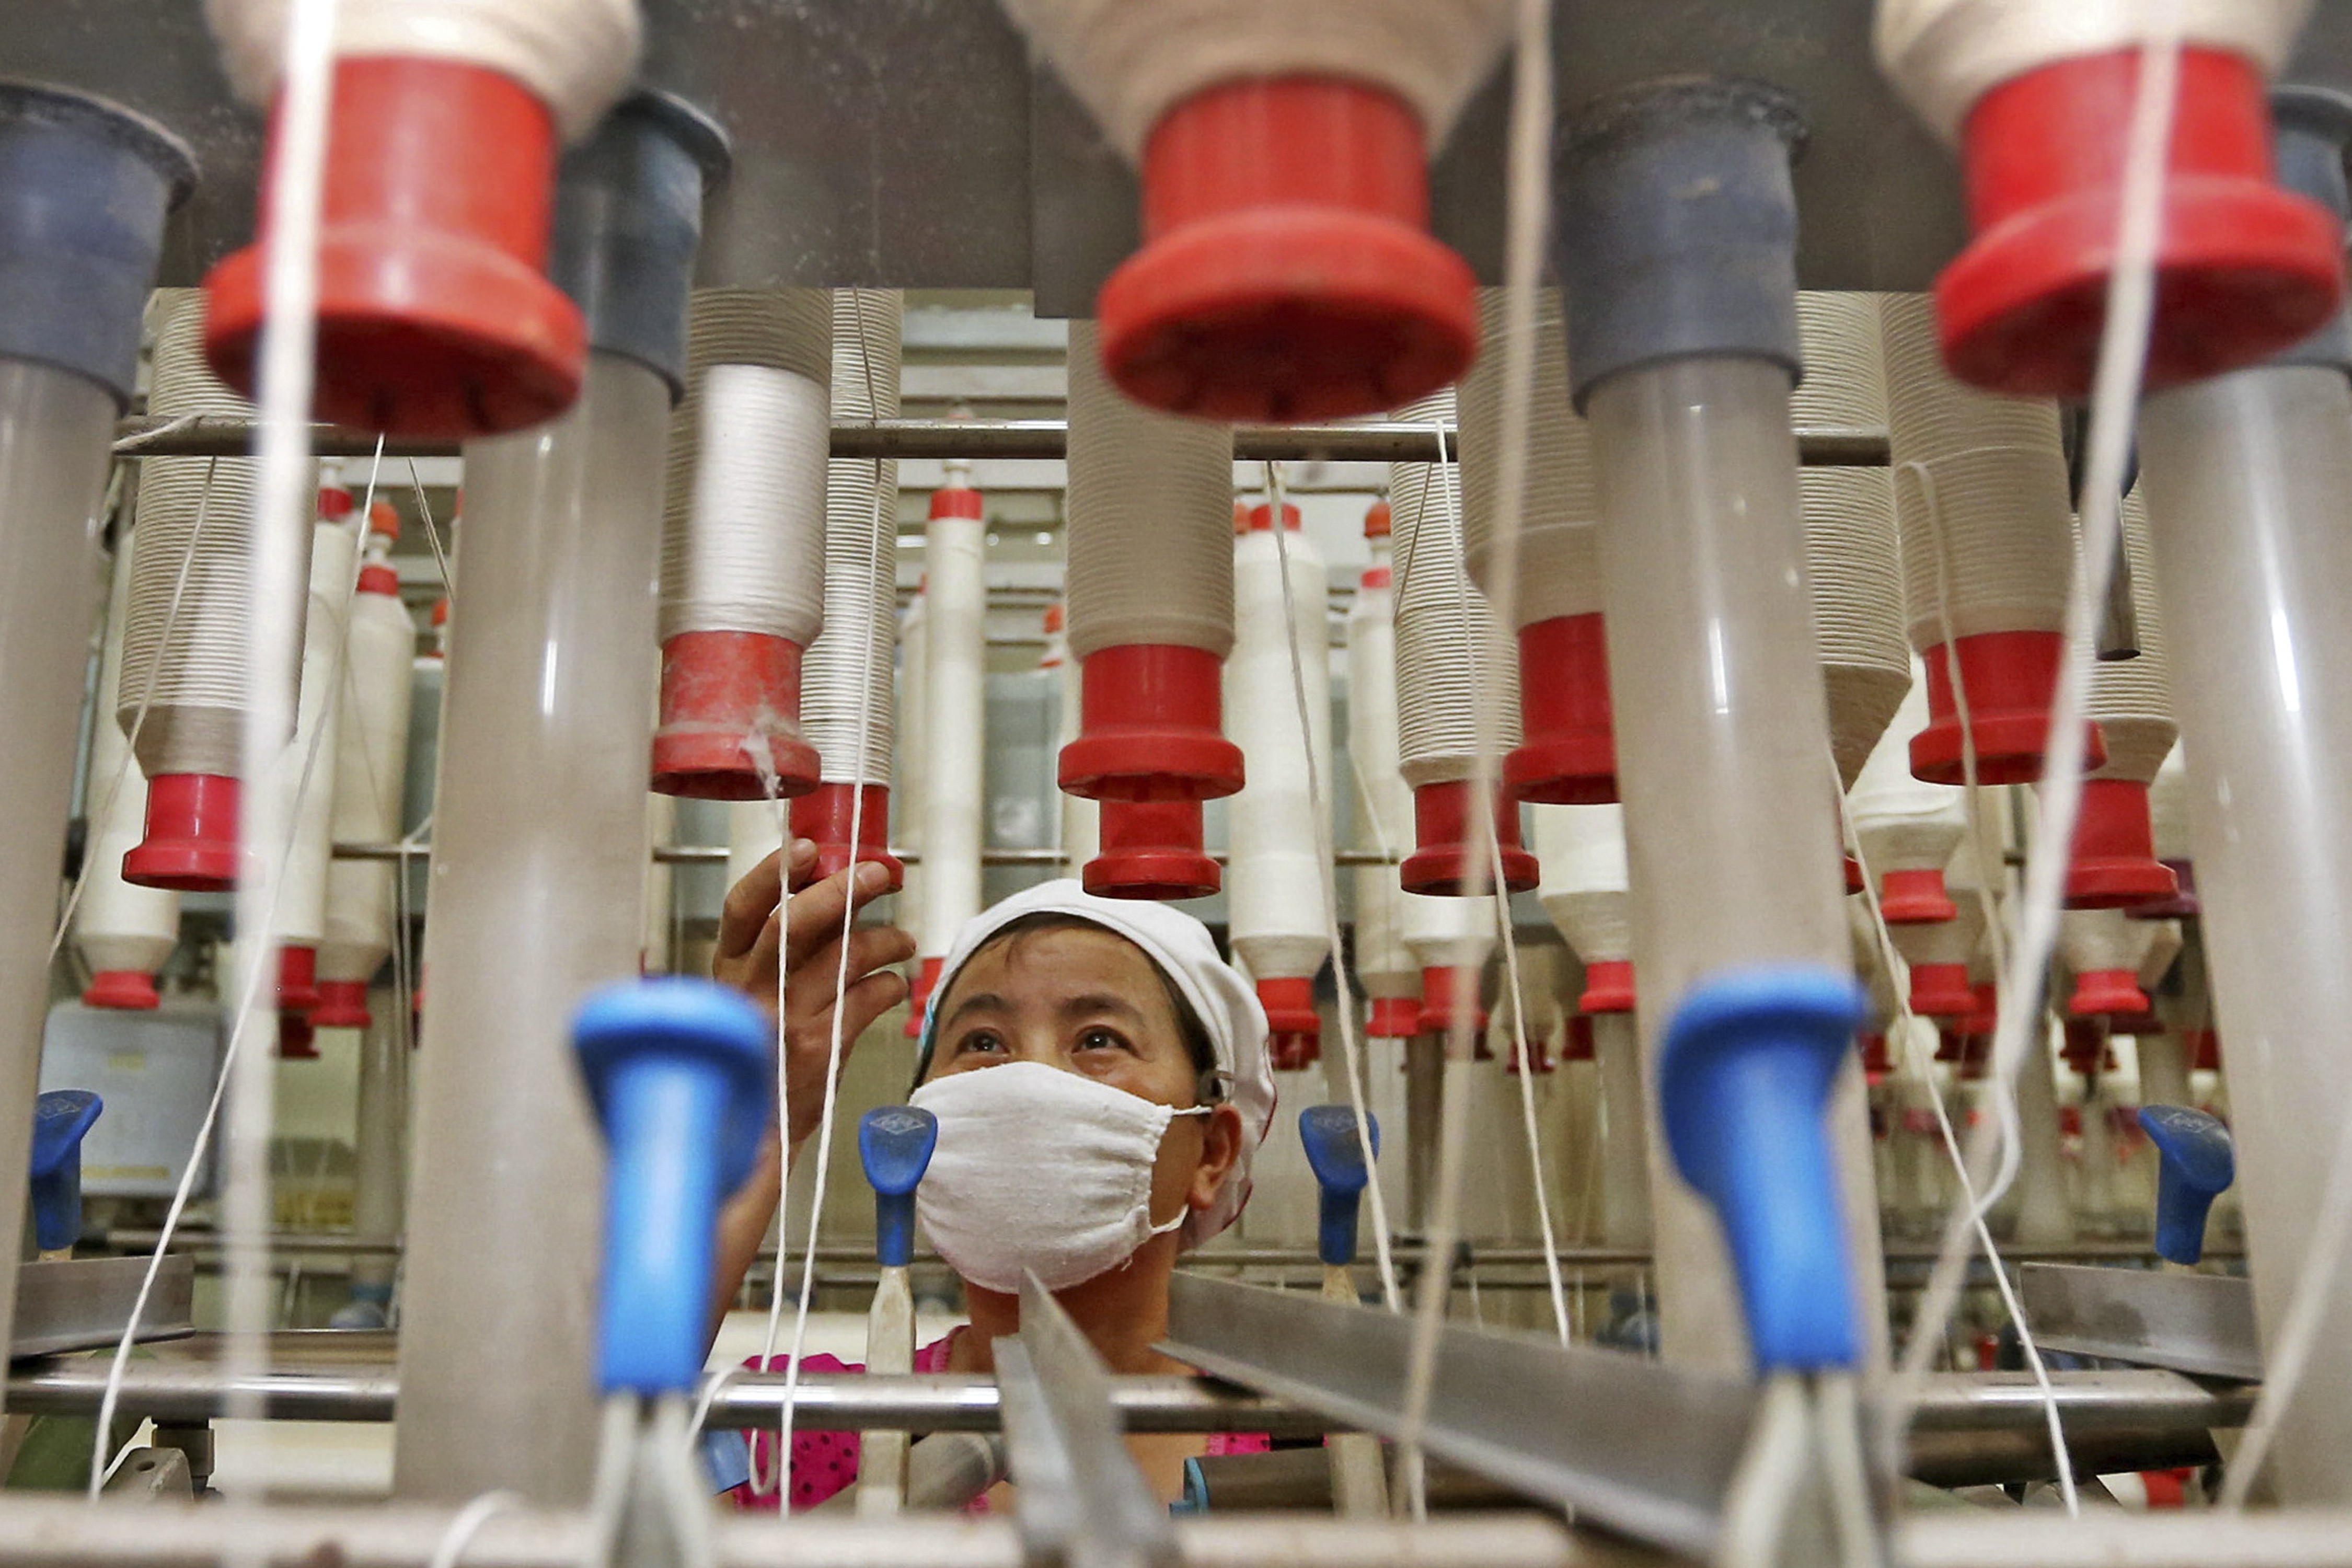 A worker checks cotton thread barrels in a textile factory in Huaibei, Anhui province, one of the major sources of migrant workers to the more prosperous and developing parts of China, such as the Pearl River Delta. But rising wages, increased reliance on automation and changing technology may put their jobs on the line. Photo: AP